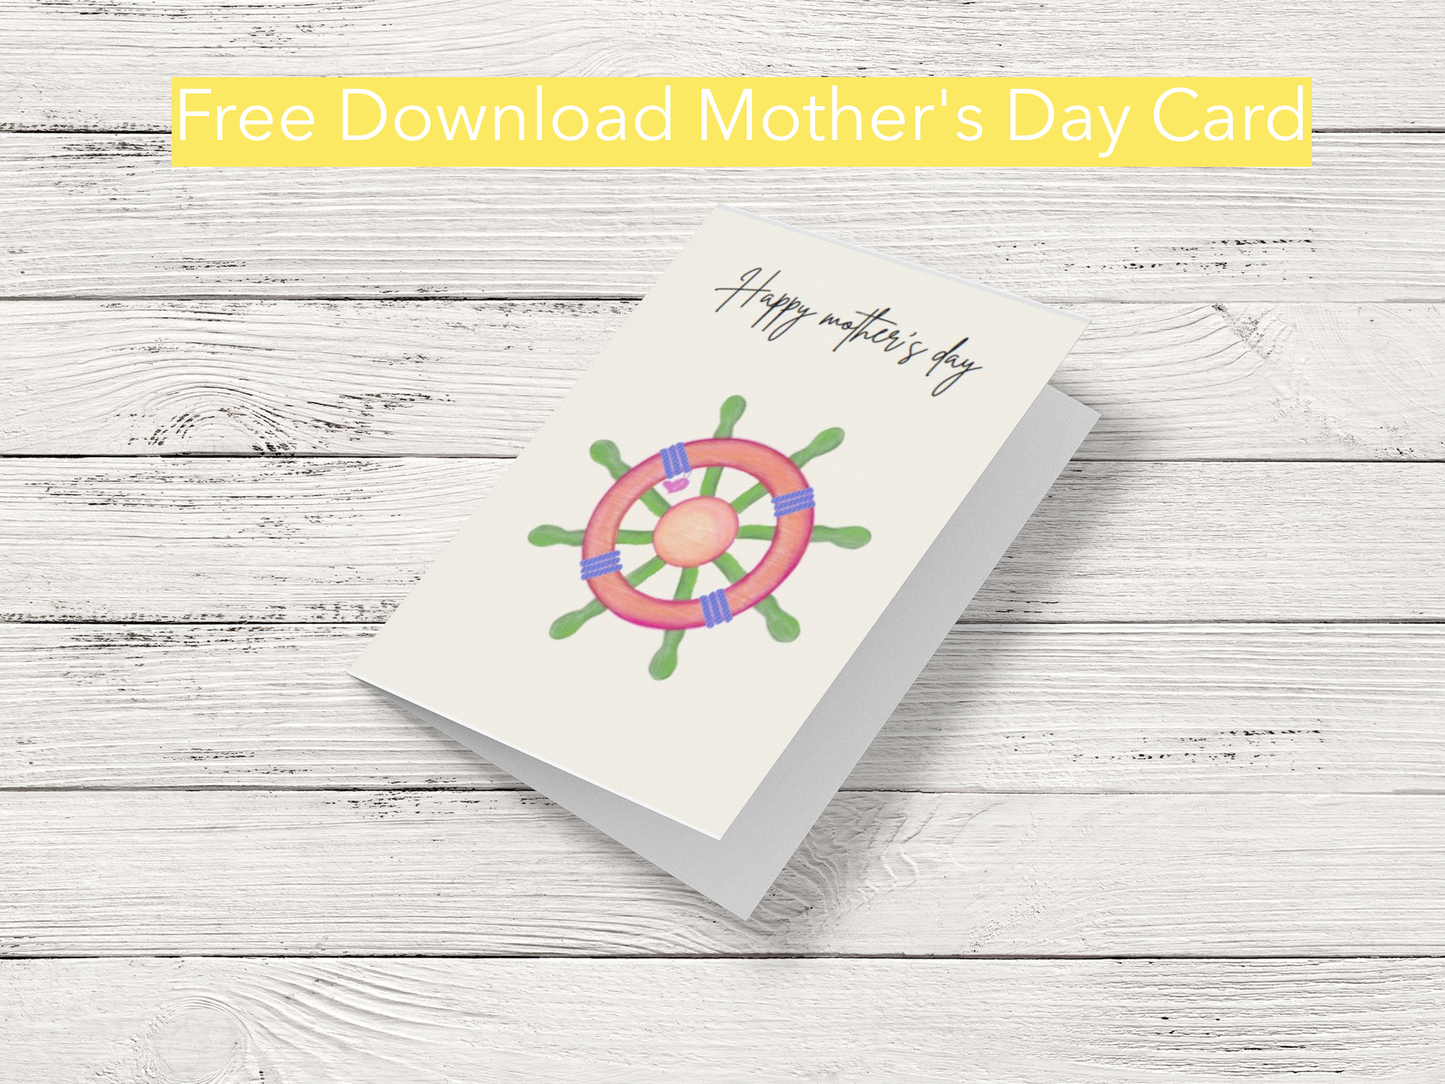 Printable - FREE Mother's Day Boat Card